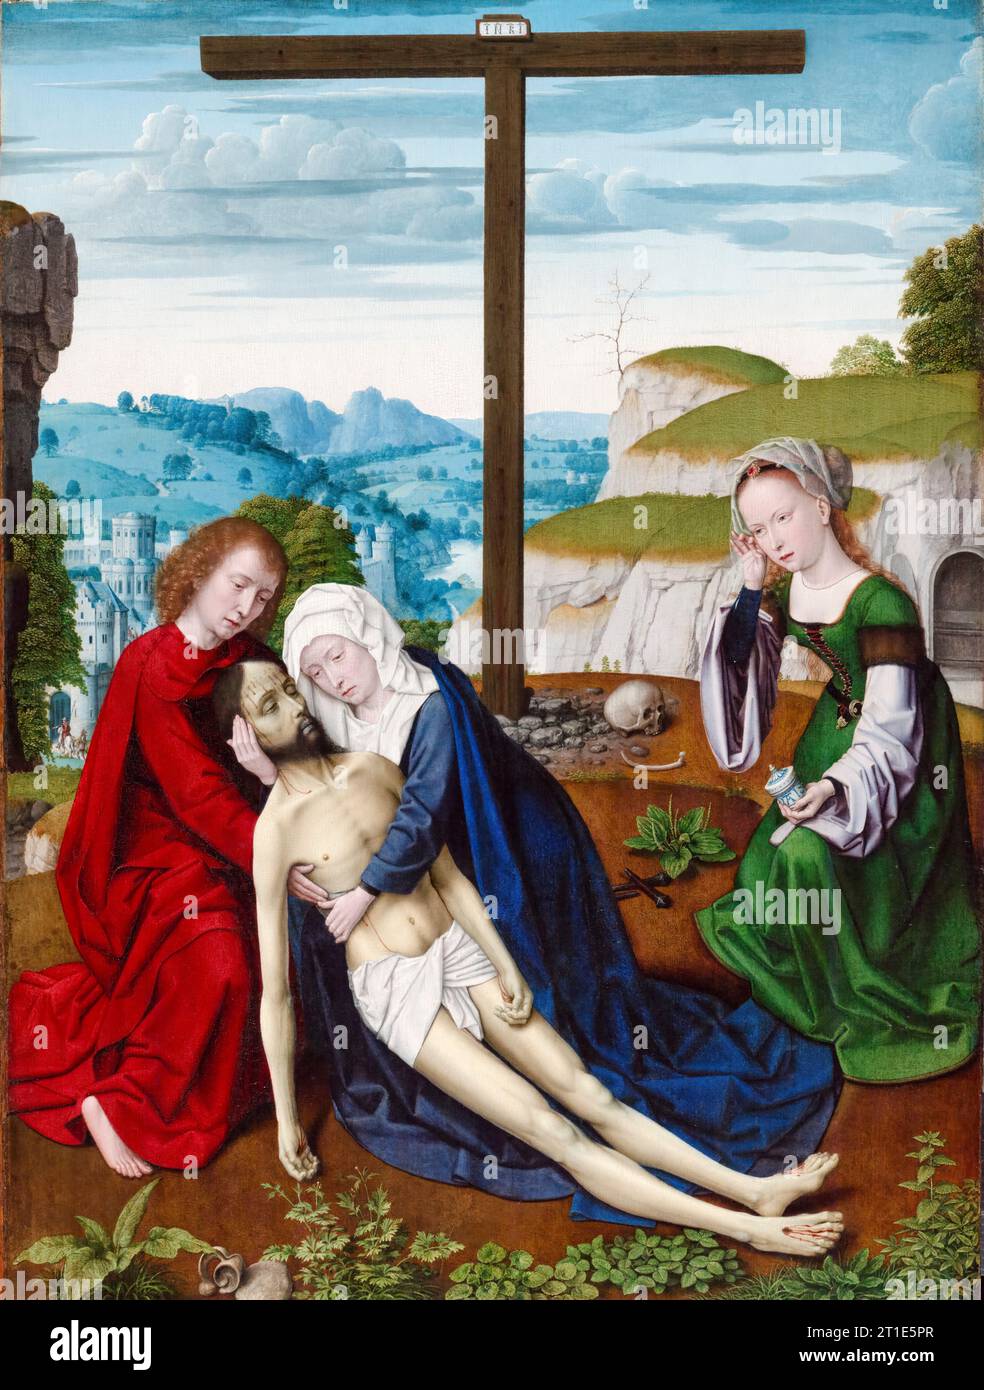 Lamentation, painting in oil on panel by Gerard David, 1515-1520 Stock Photo